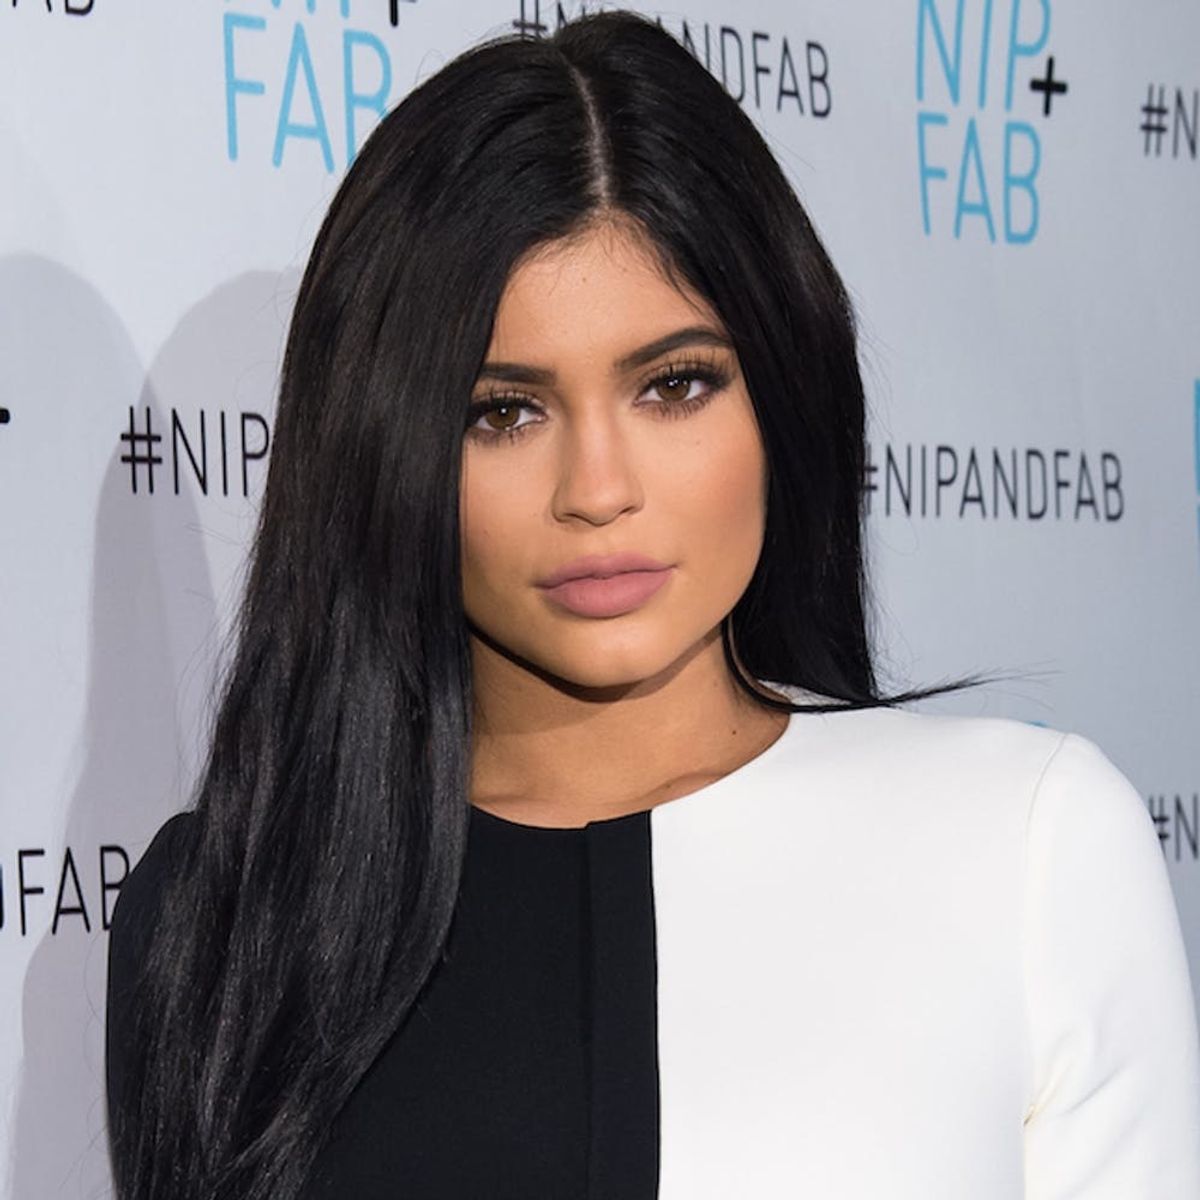 Kylie Jenner FINALLY Reveals What Her New Tattoo Means